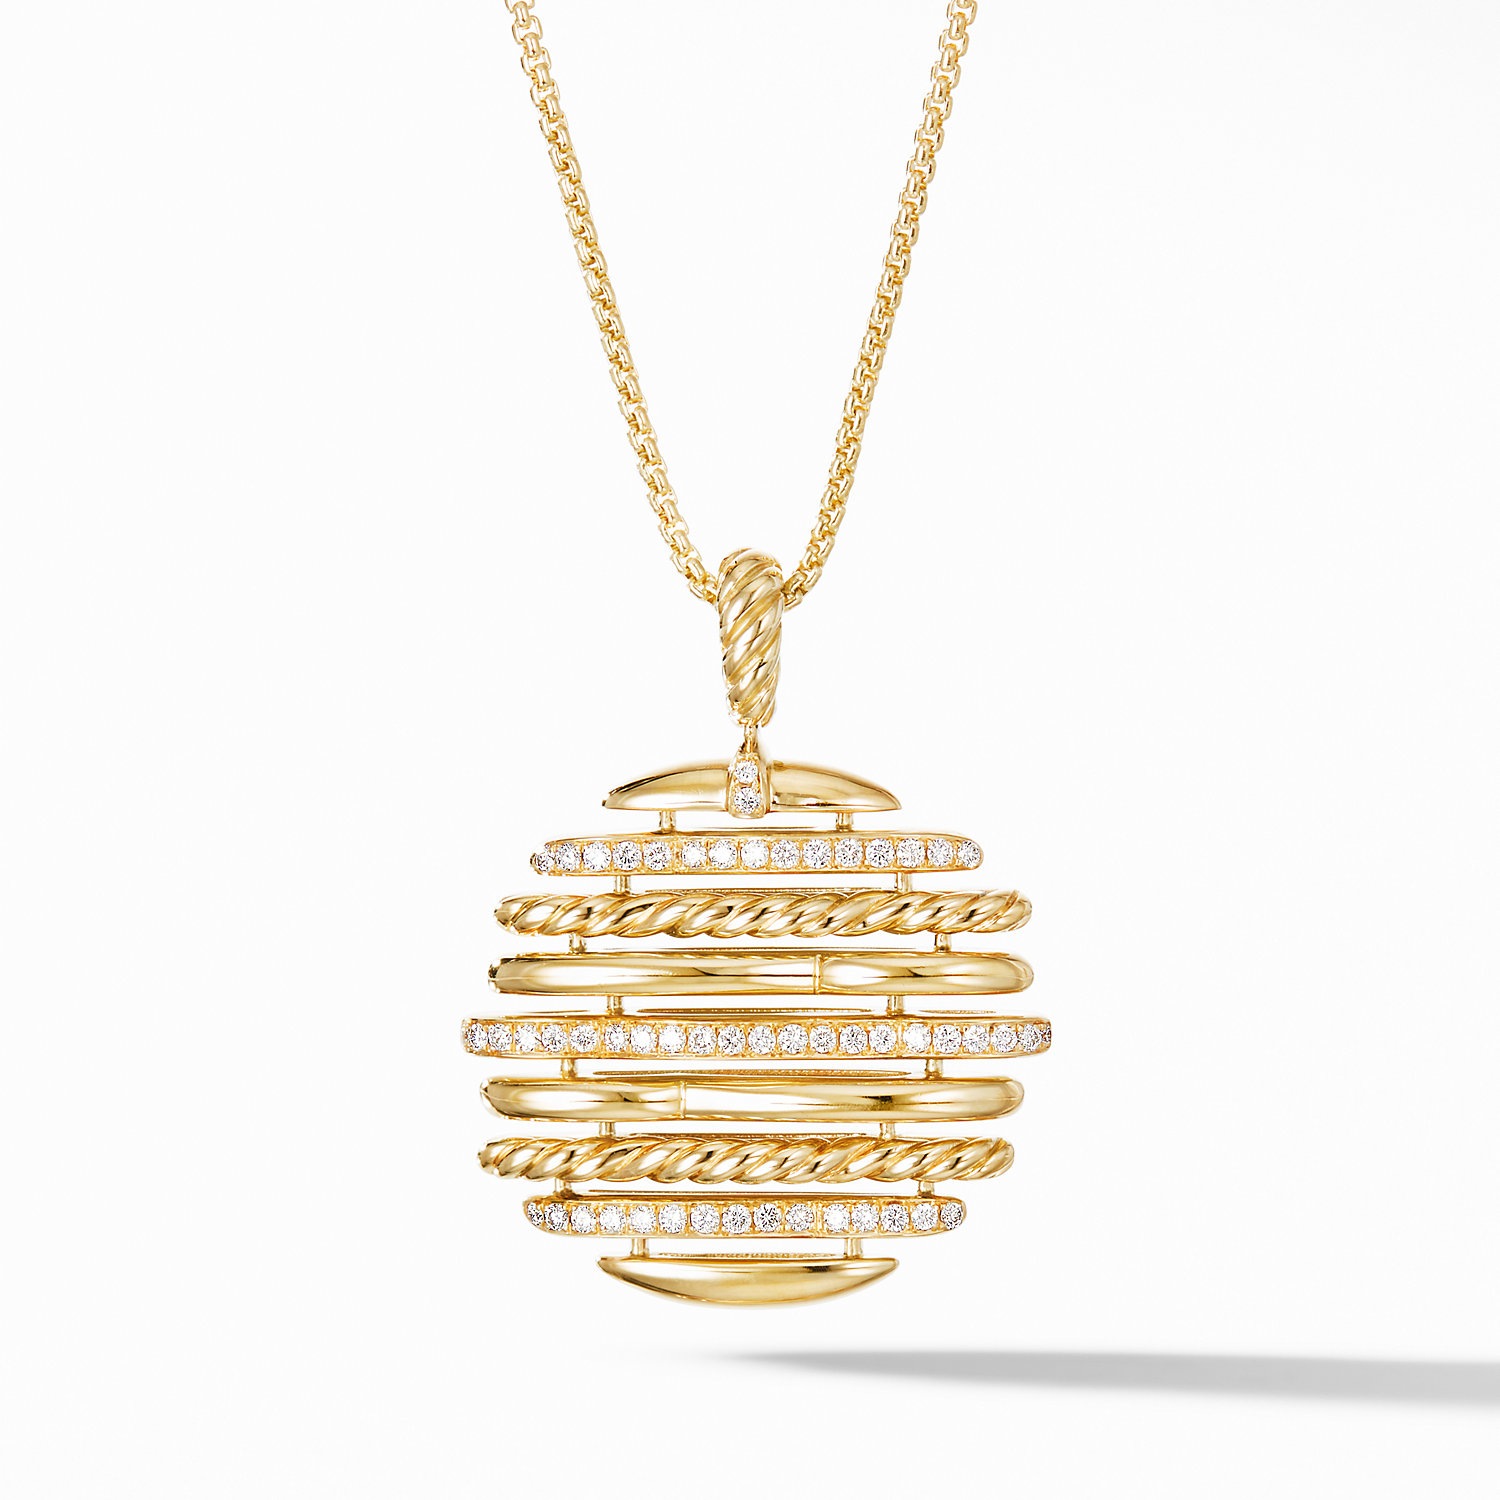 David Yurman Tides Pendant Necklace in 18K Yellow Gold with Pav ...